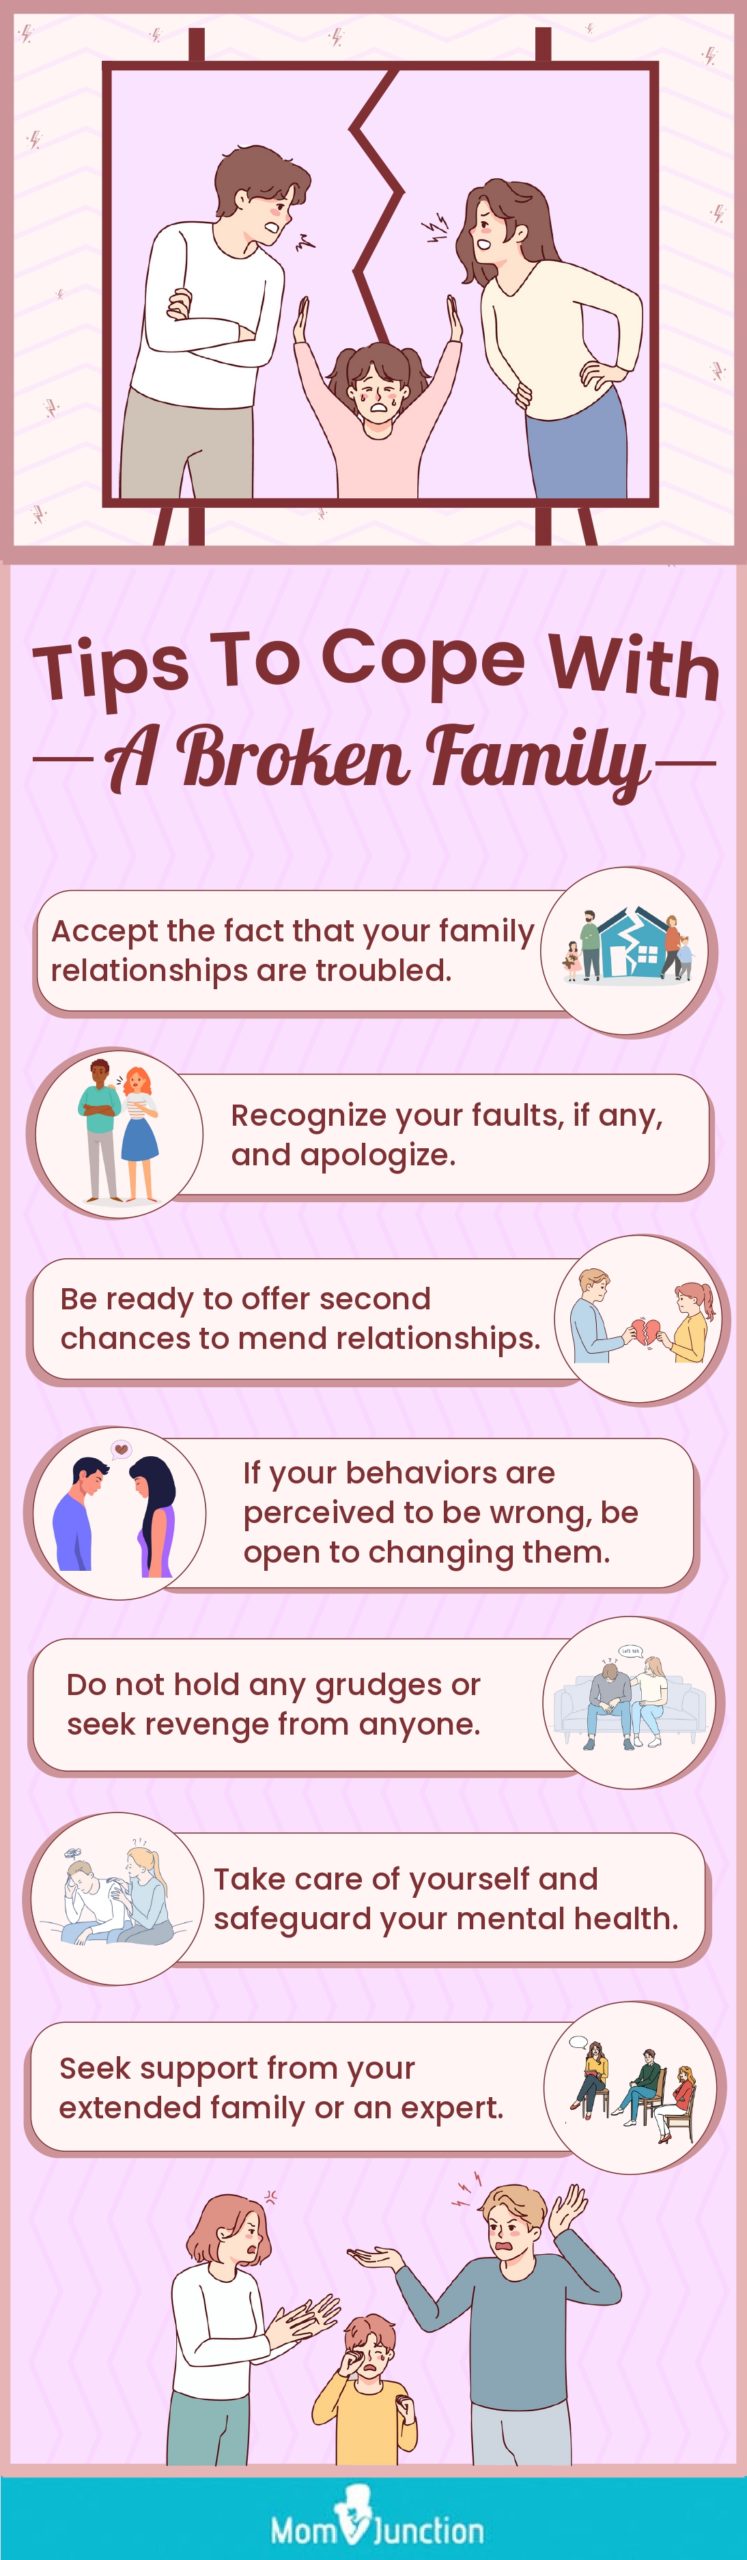 tips to cope with a broken family [infographic]